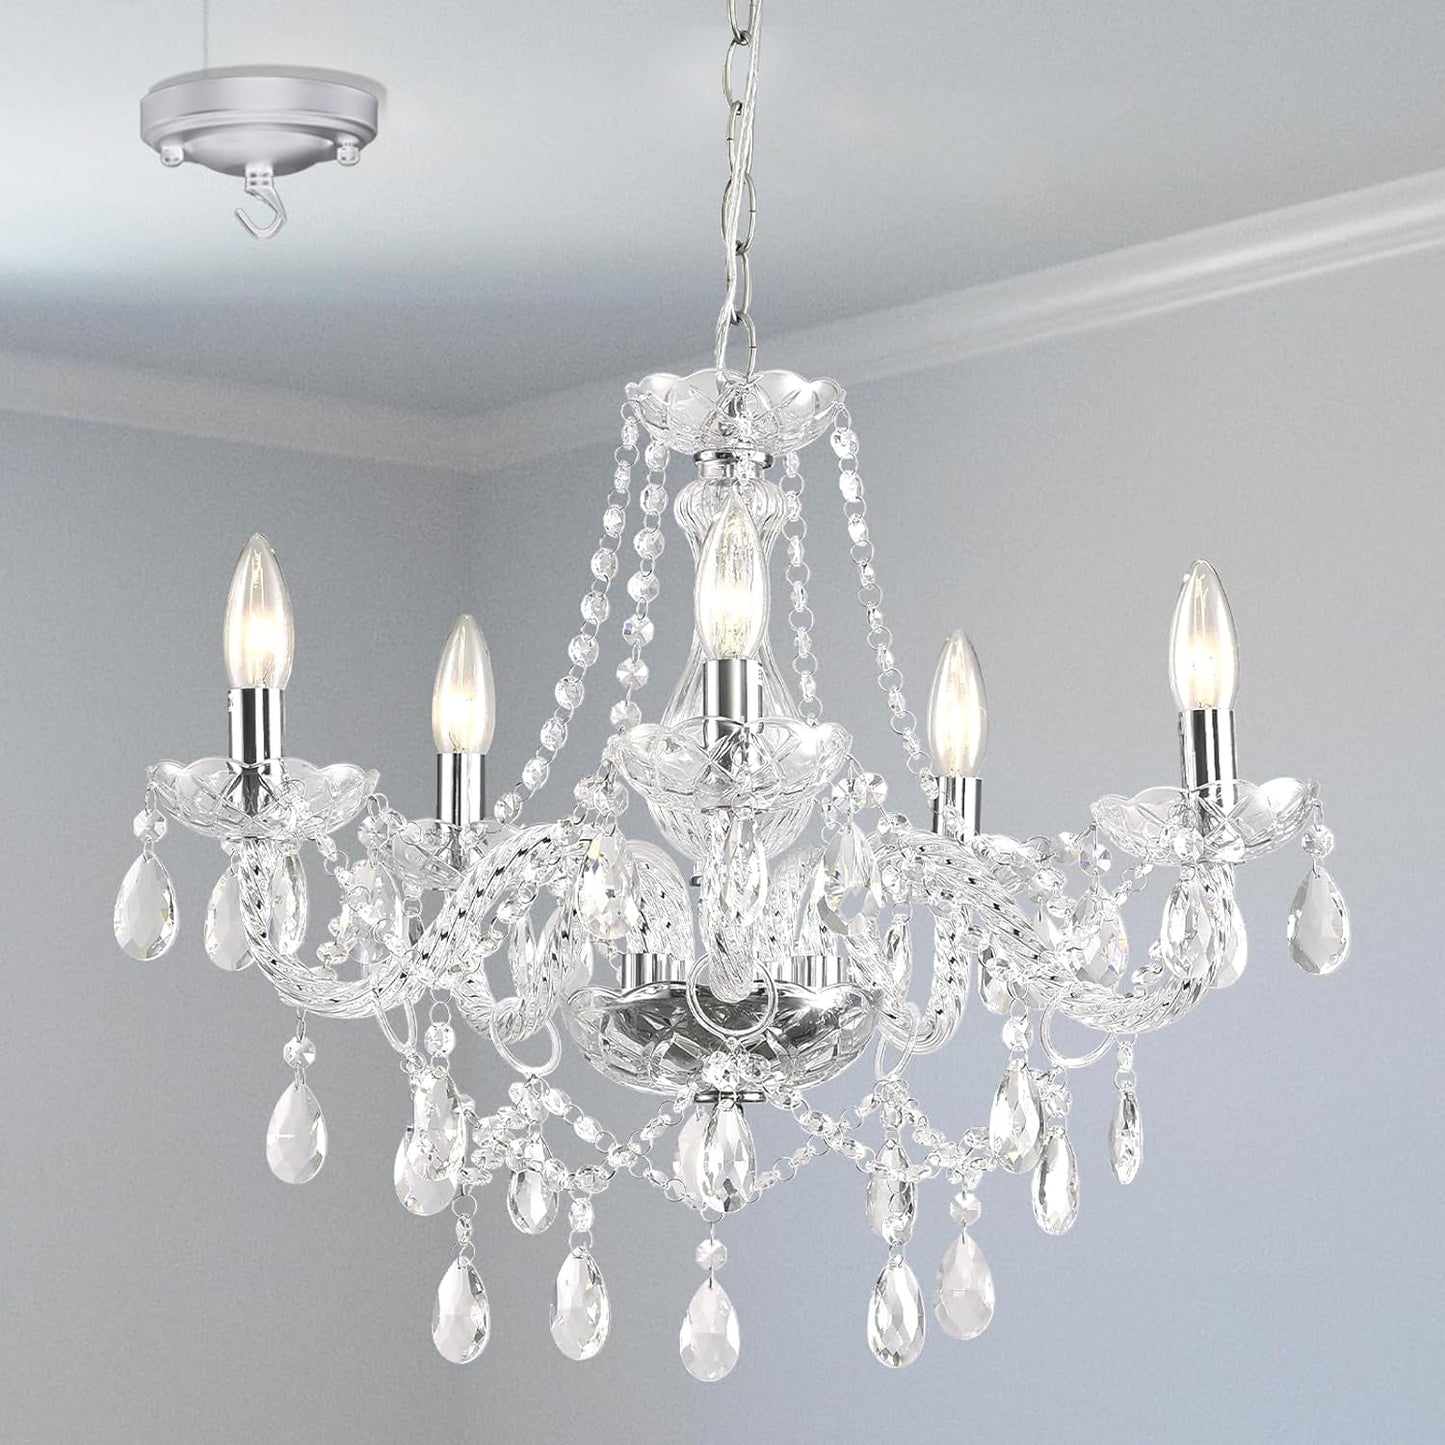 Dimmable Plug-In 5 Light Crystal Chandelier with Cord Glass, Chrome Candle Style Hanging Swag Lighting, K9 Crystals Beads Modern Pendant Light Fixtures Ceiling for Dining Living Room Bedroom